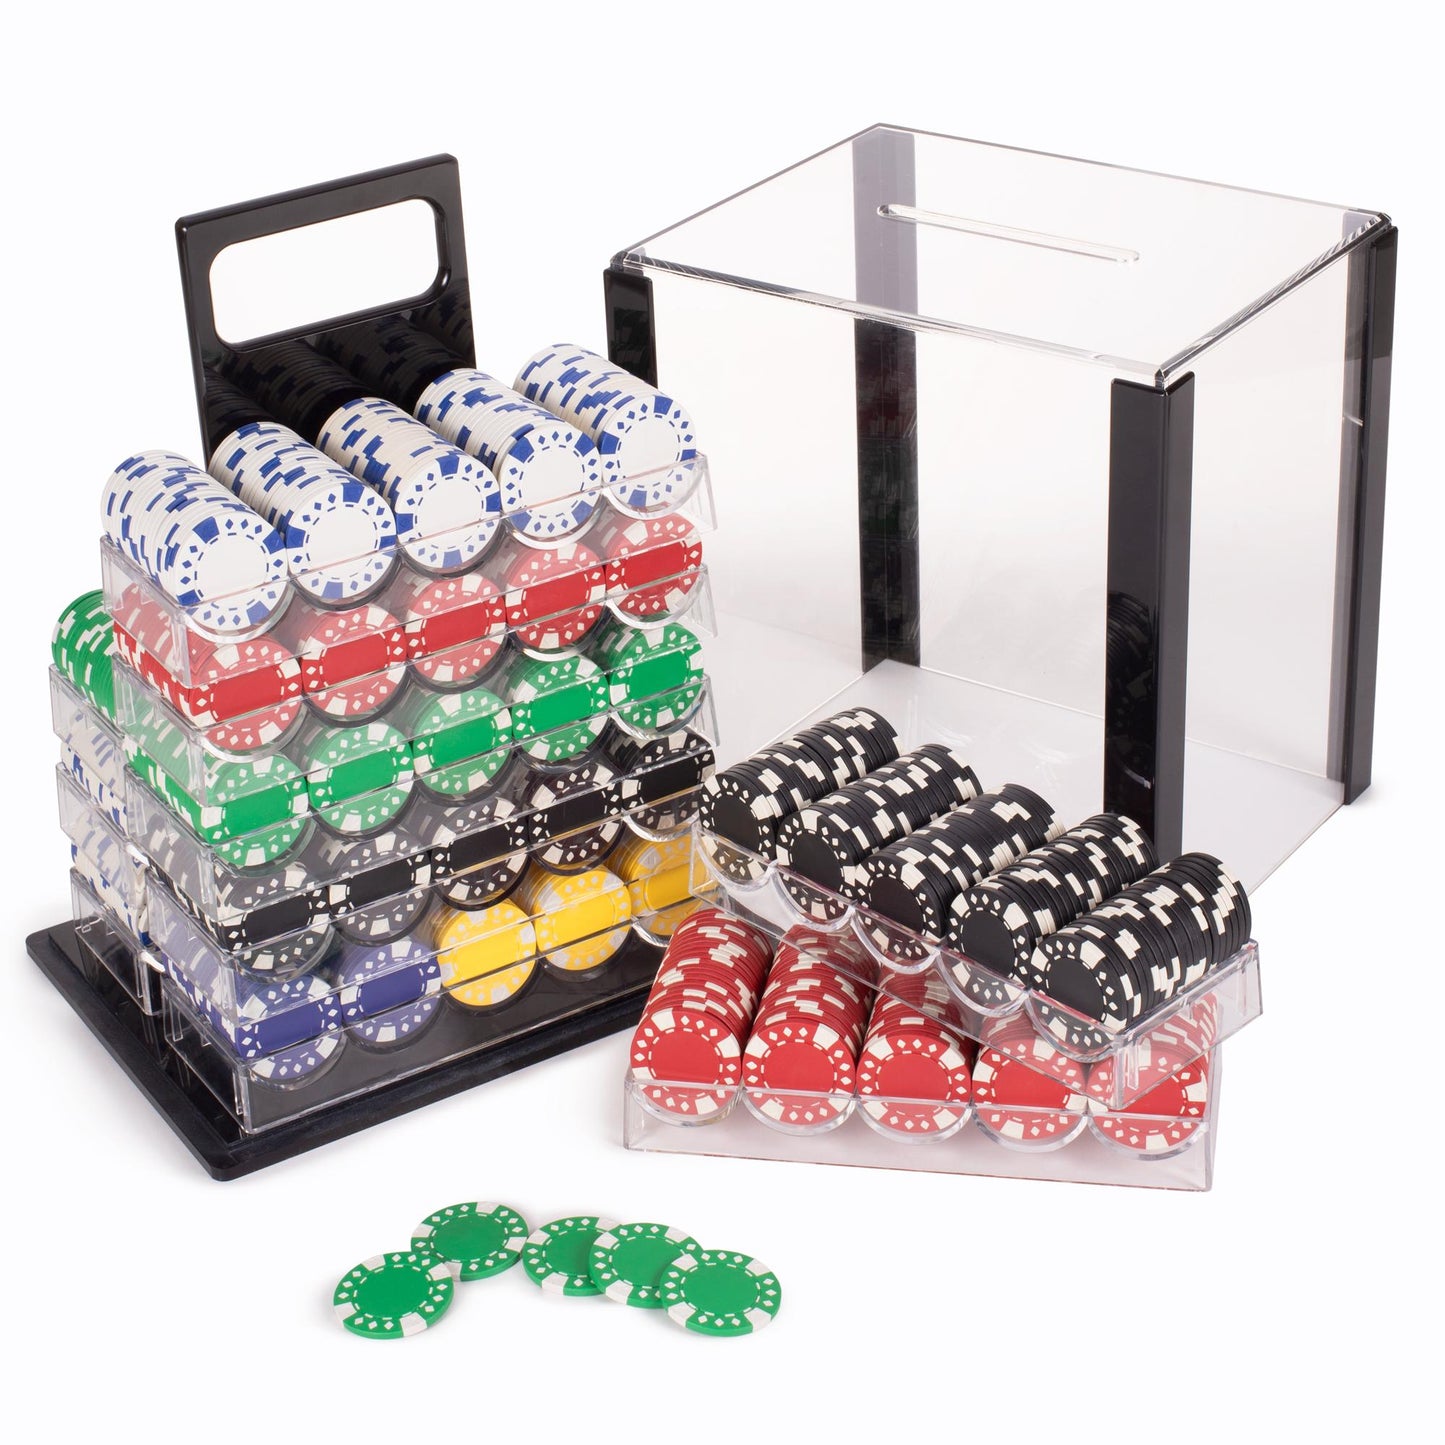 1000 Diamond Suited Poker Chips with Acrylic Carrier